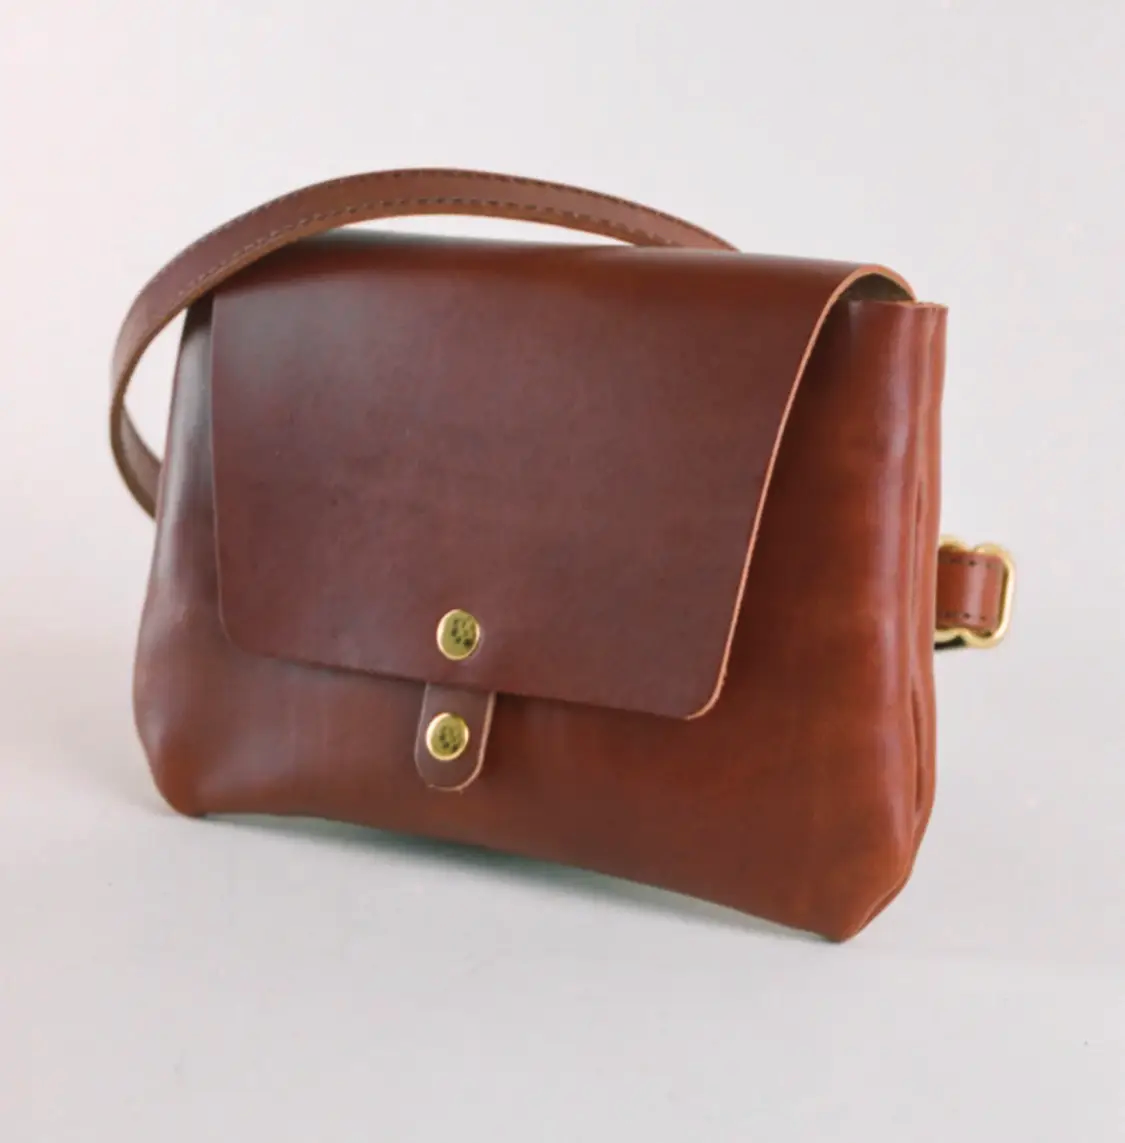 Brown hip satchel, closed view